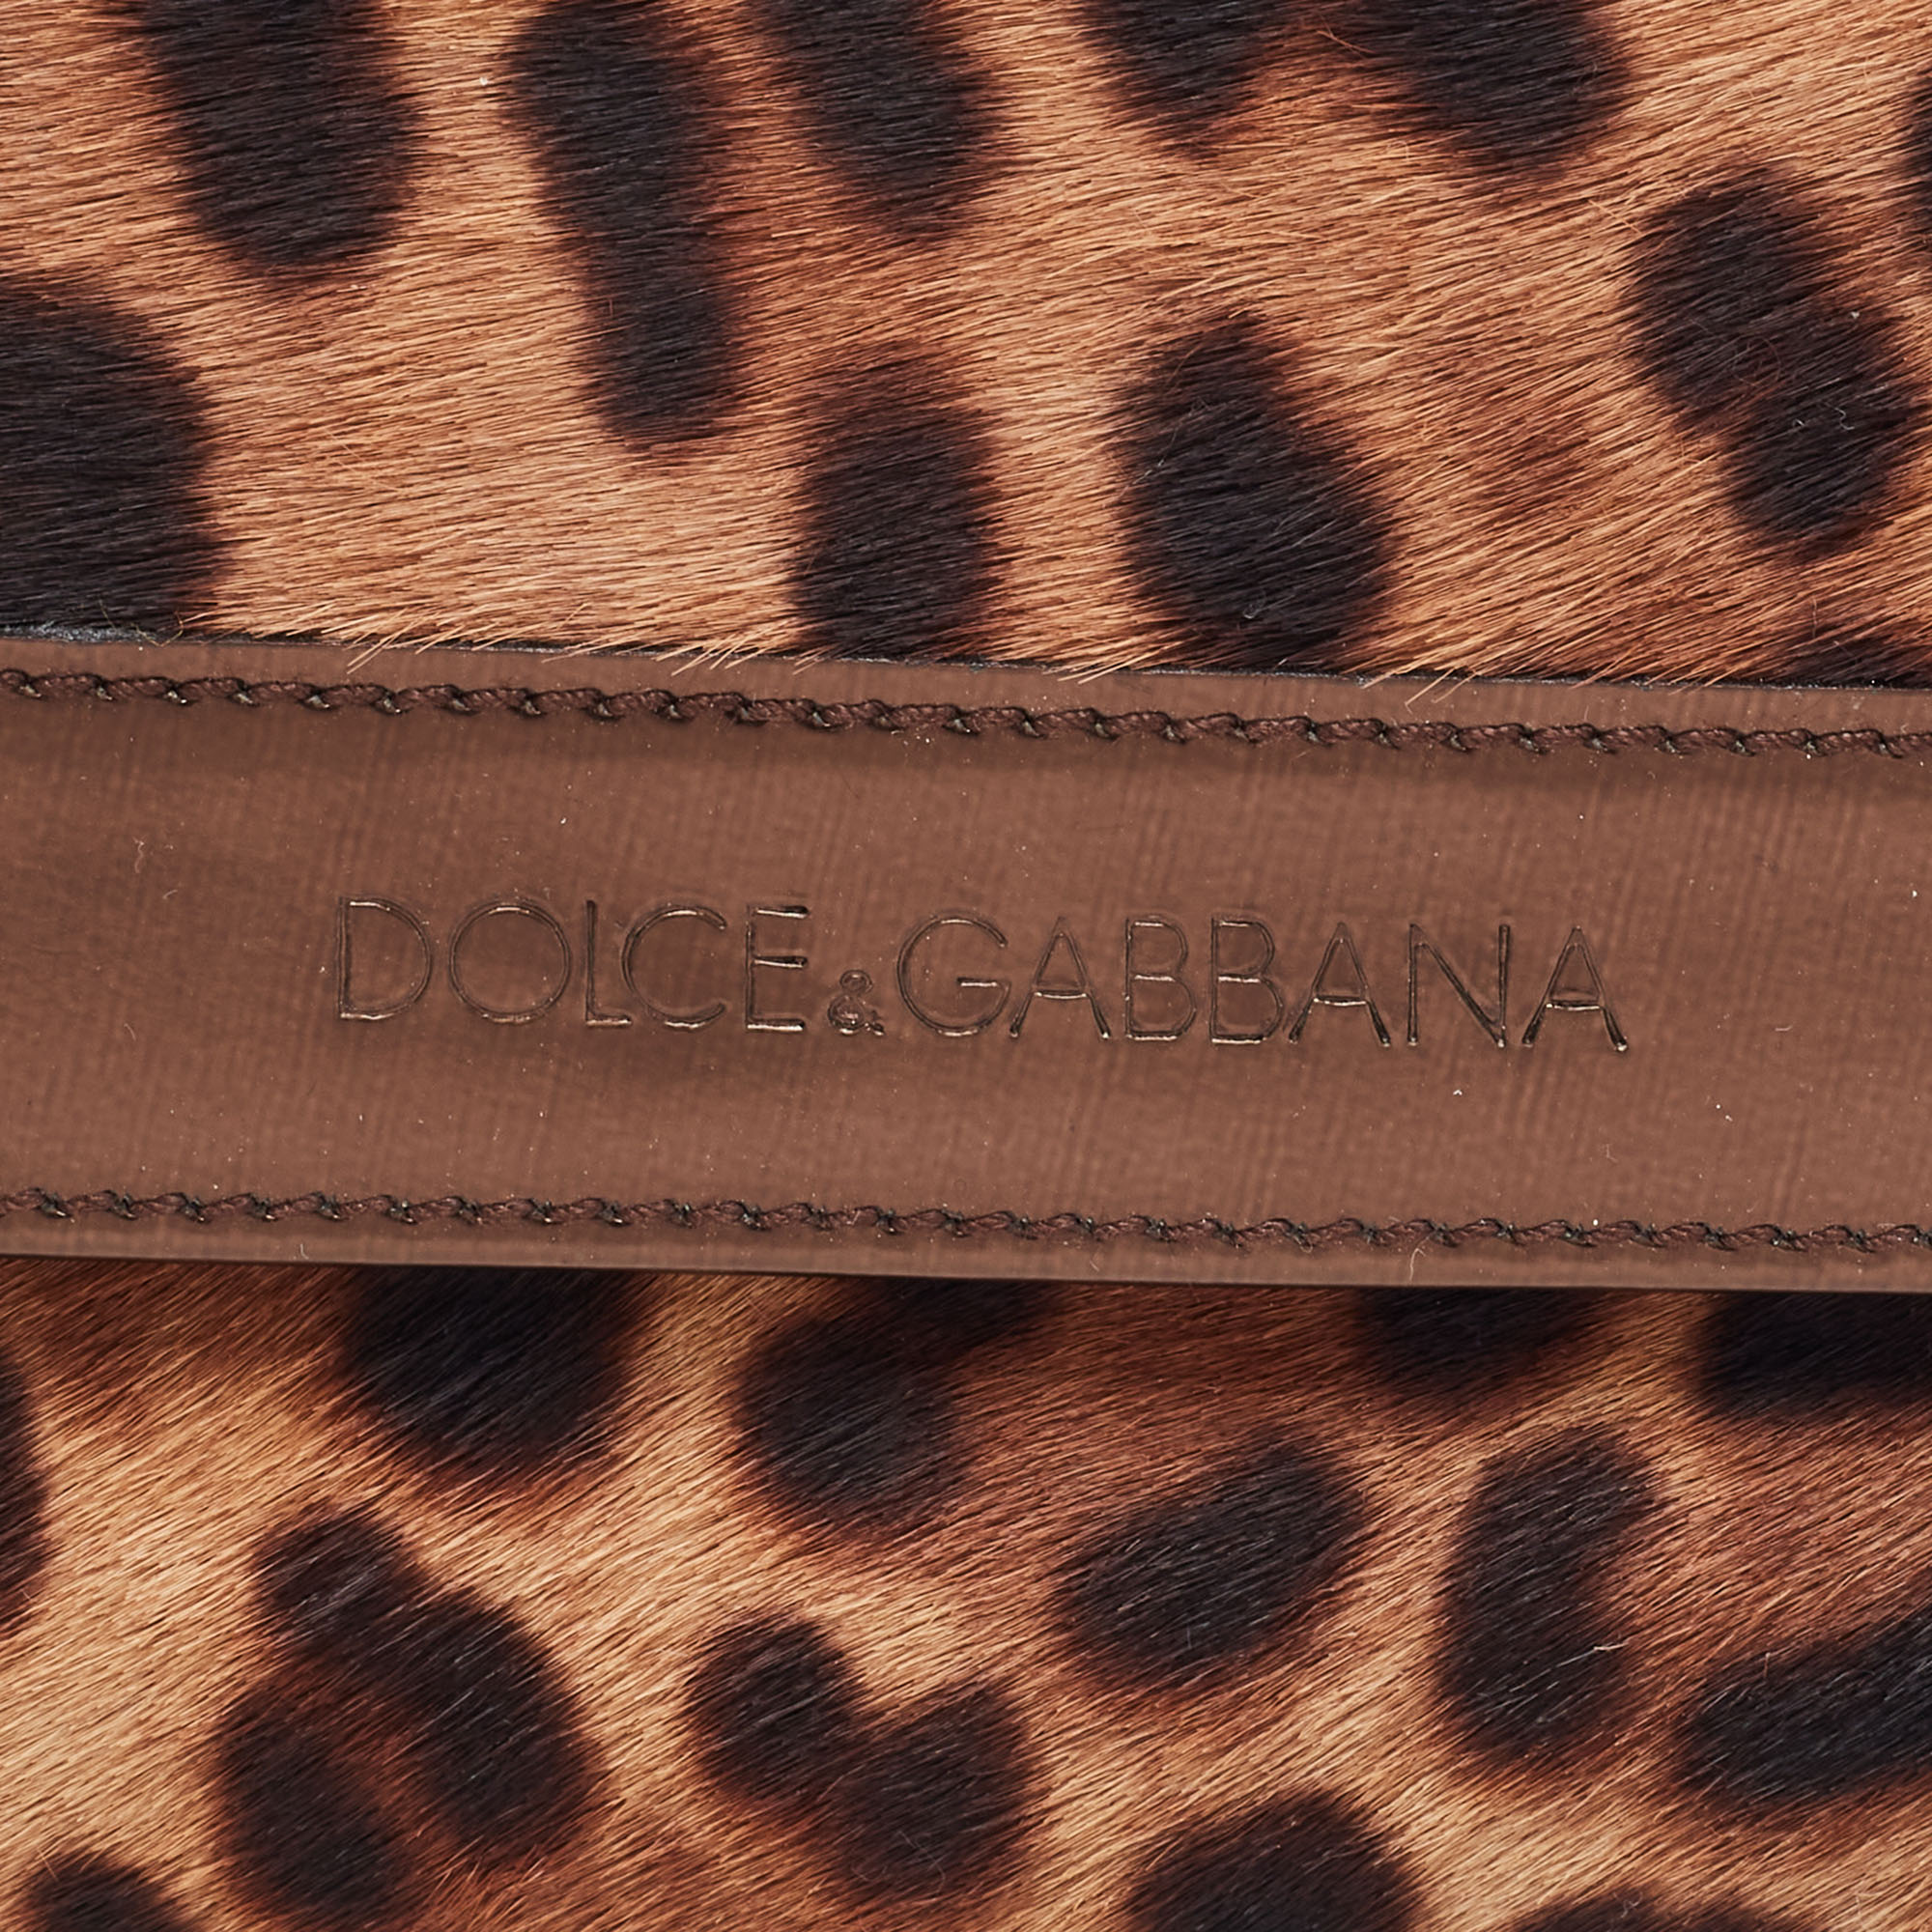 Dolce & Gabbana Brown Leopard Print Calfhair And Patent Leather Continental Wallet